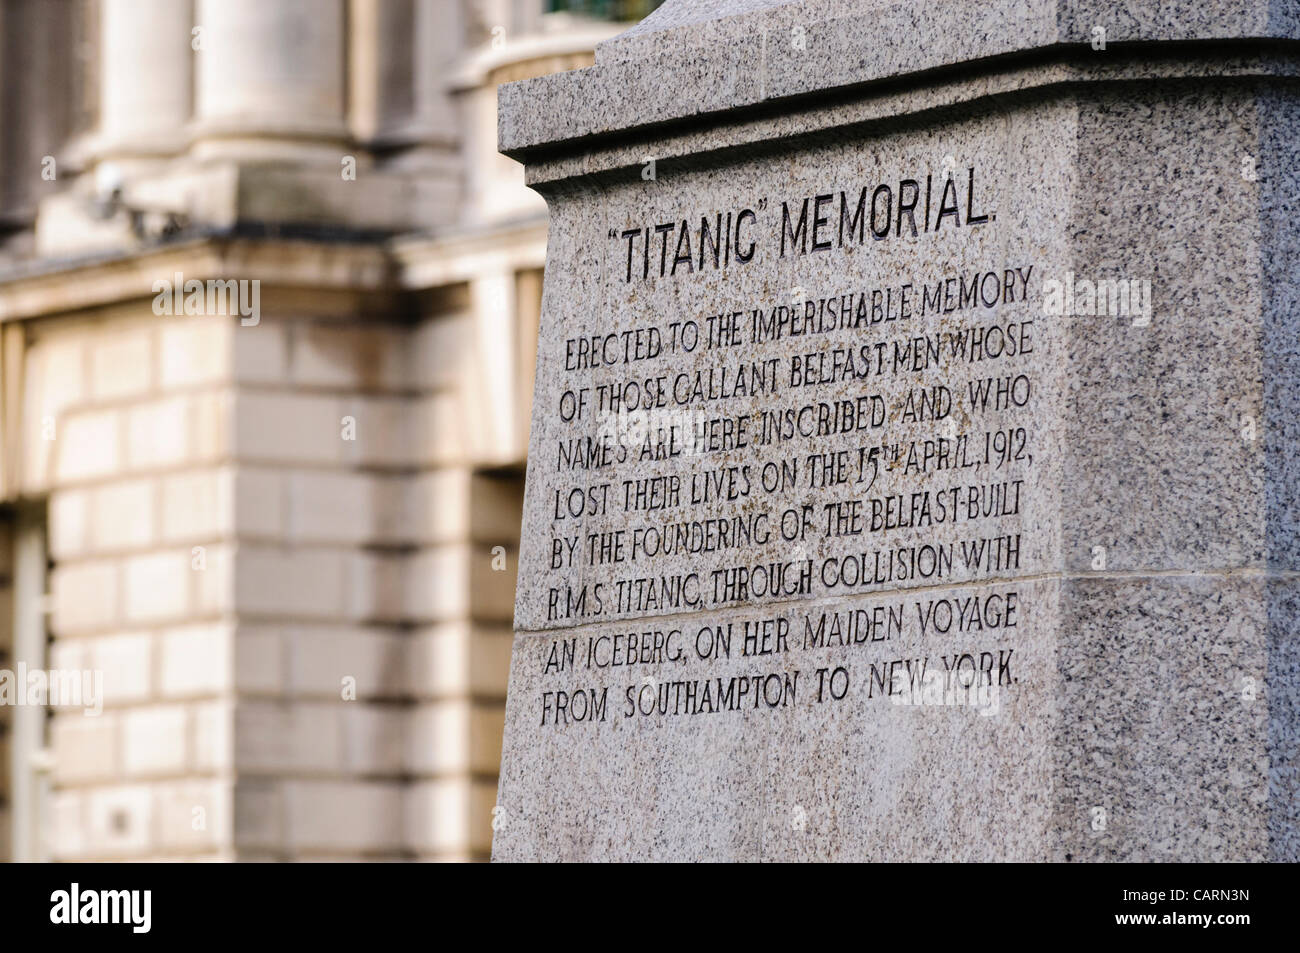 Belfast, UK. 15/04/2012 - The Titanic Memorial in the newly opened Titanic Memorial Garden at Belfast City Hall. Stock Photo